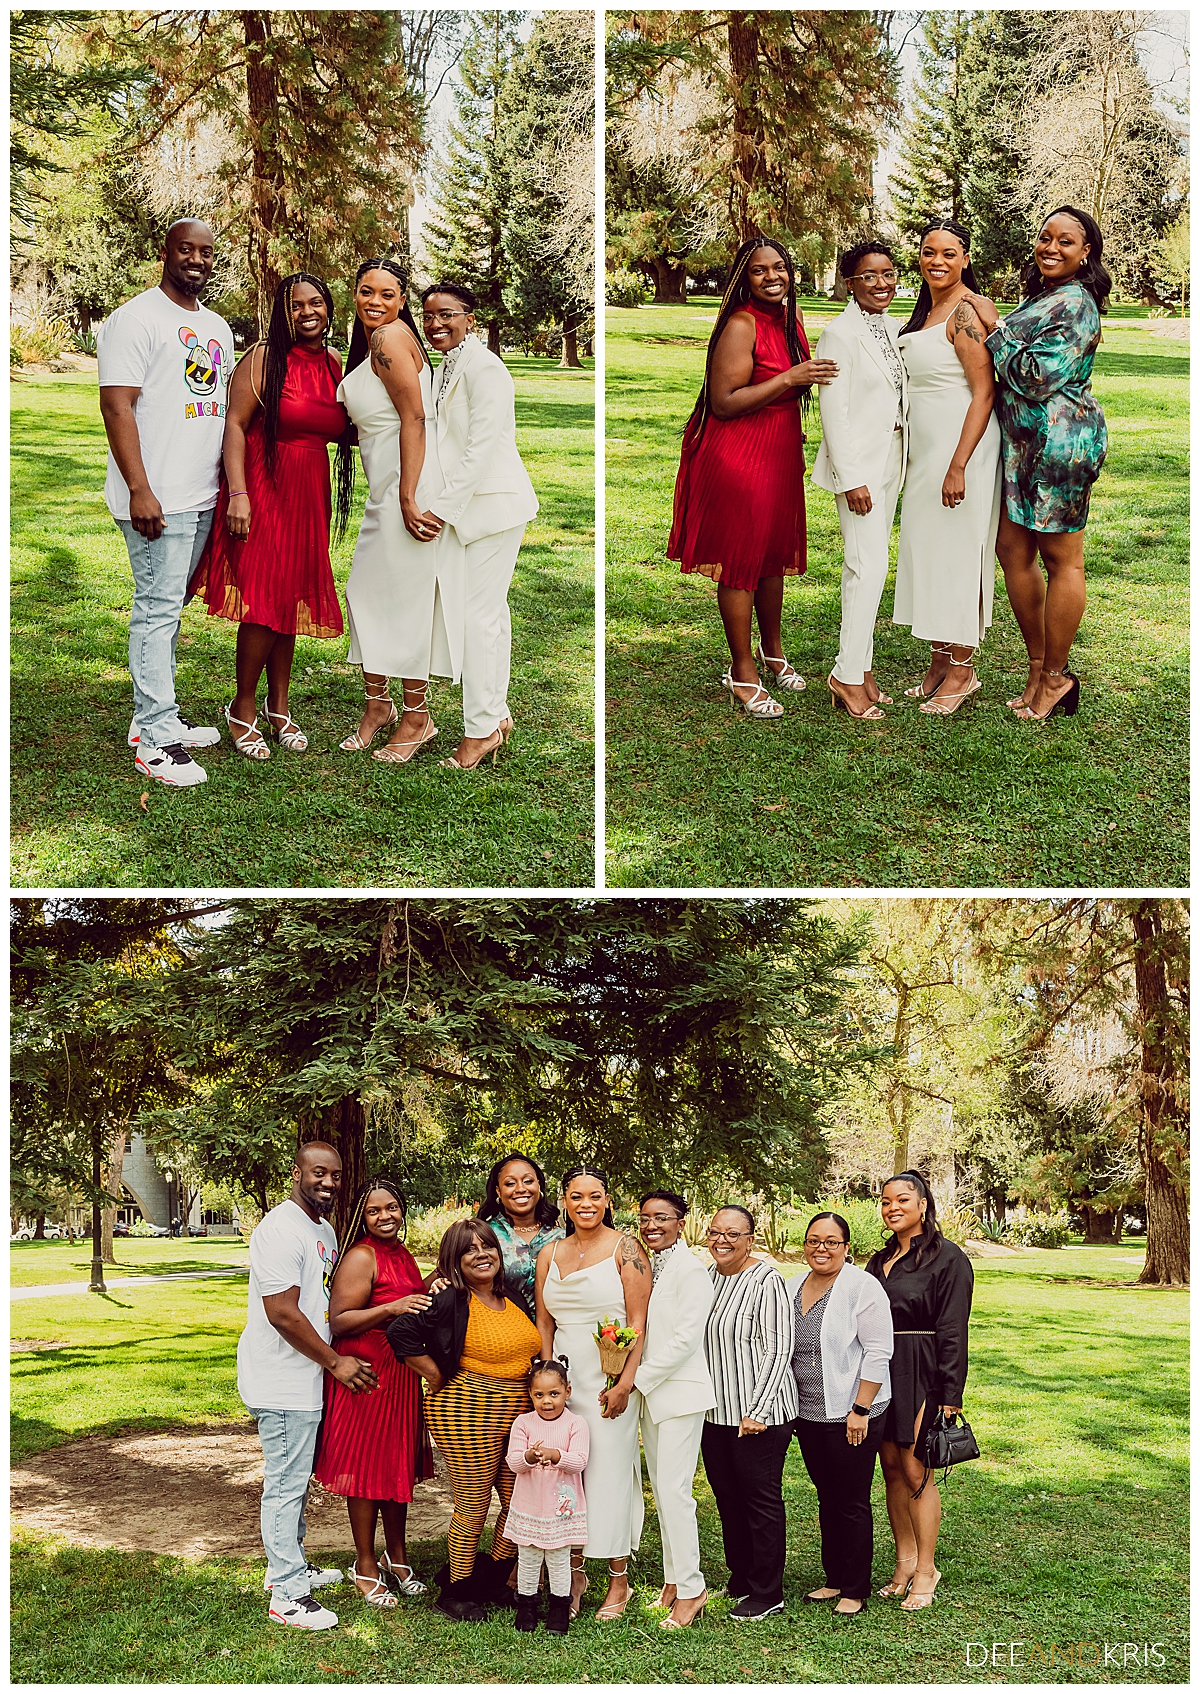 Three images: Top left image of couple standing with another couple. Top right image of couple standing with two female guests. Bottom image group shot of couple with all guests.